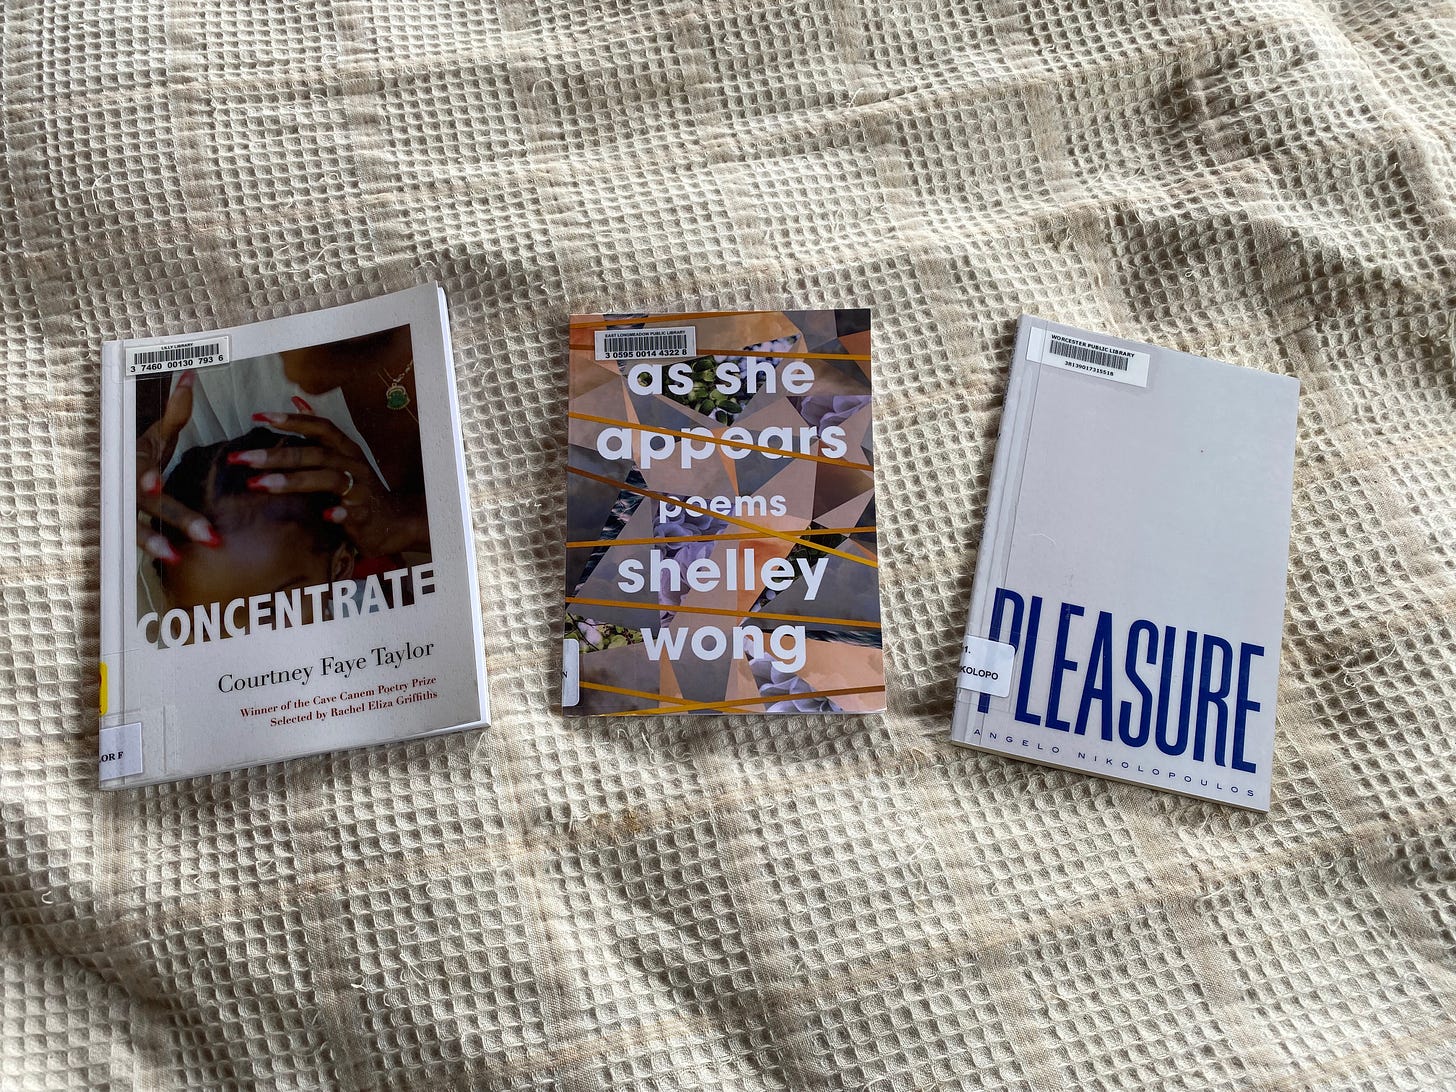 Three queer poetry collections, Concentrate, As She Appears, and Pleasure, laid out on a white bedspread.